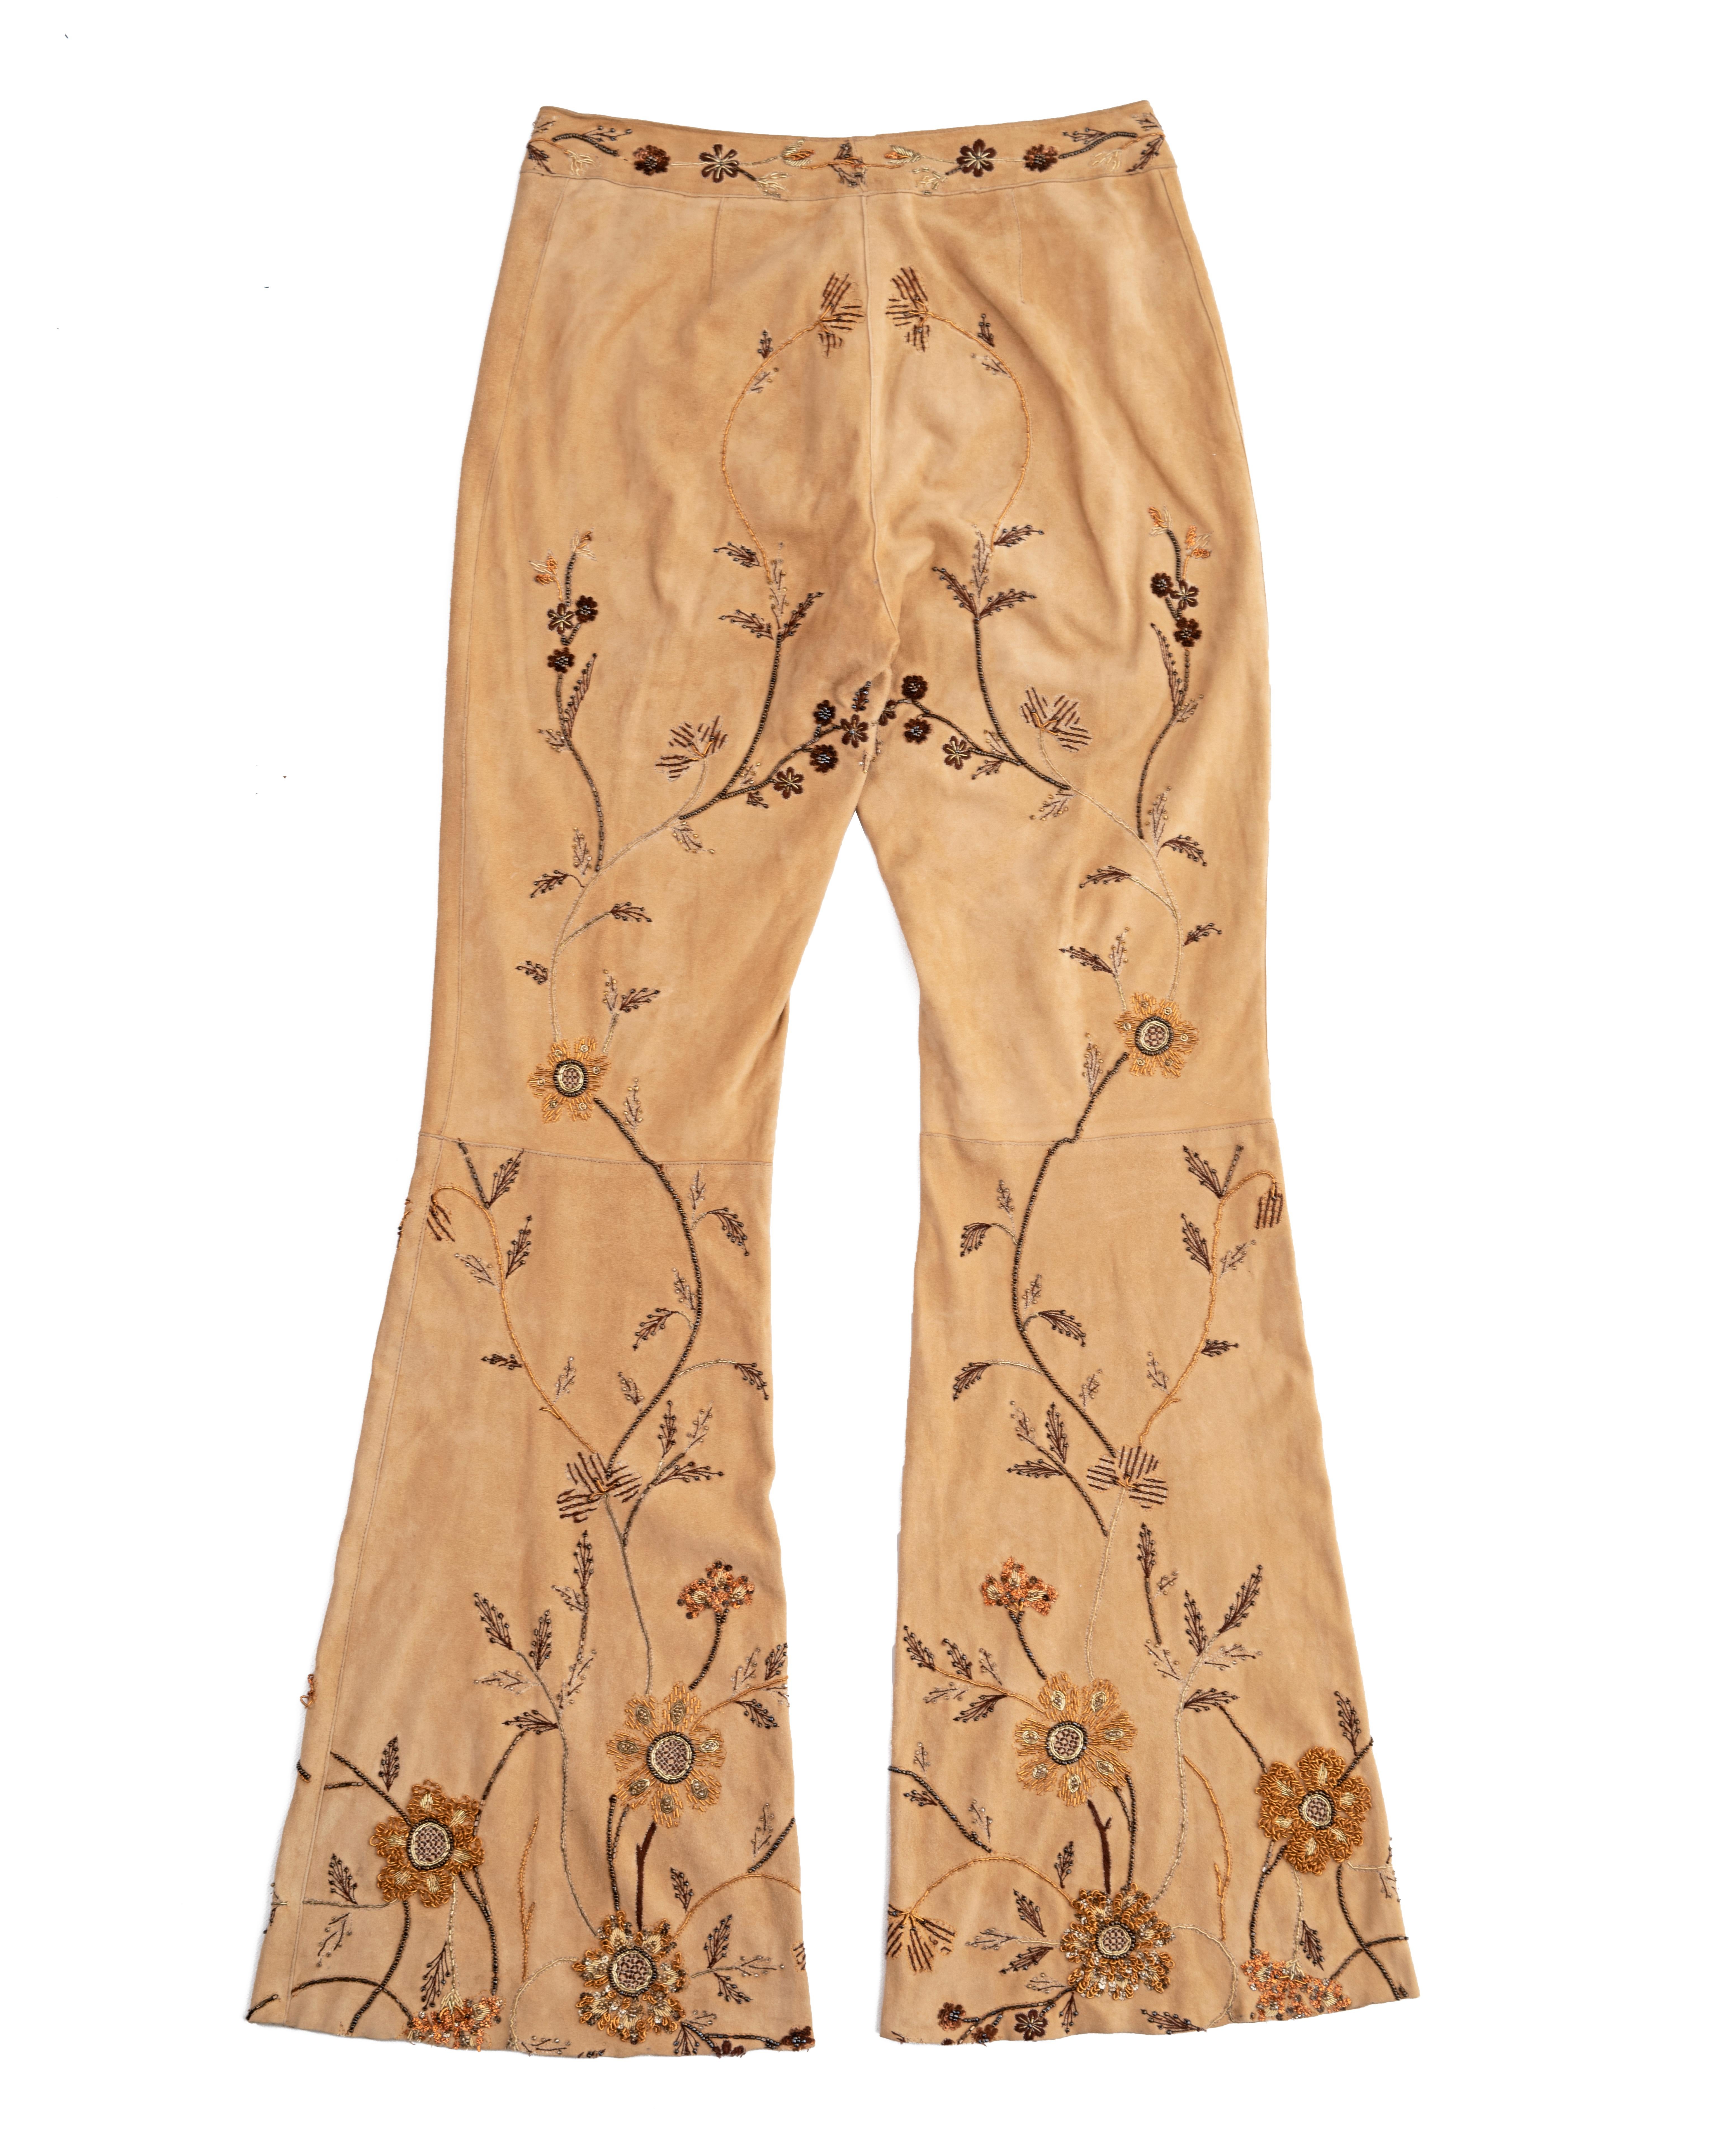 Dolce & Gabbana cream goat suede embroidered flared pants, ss 2001 For Sale 1